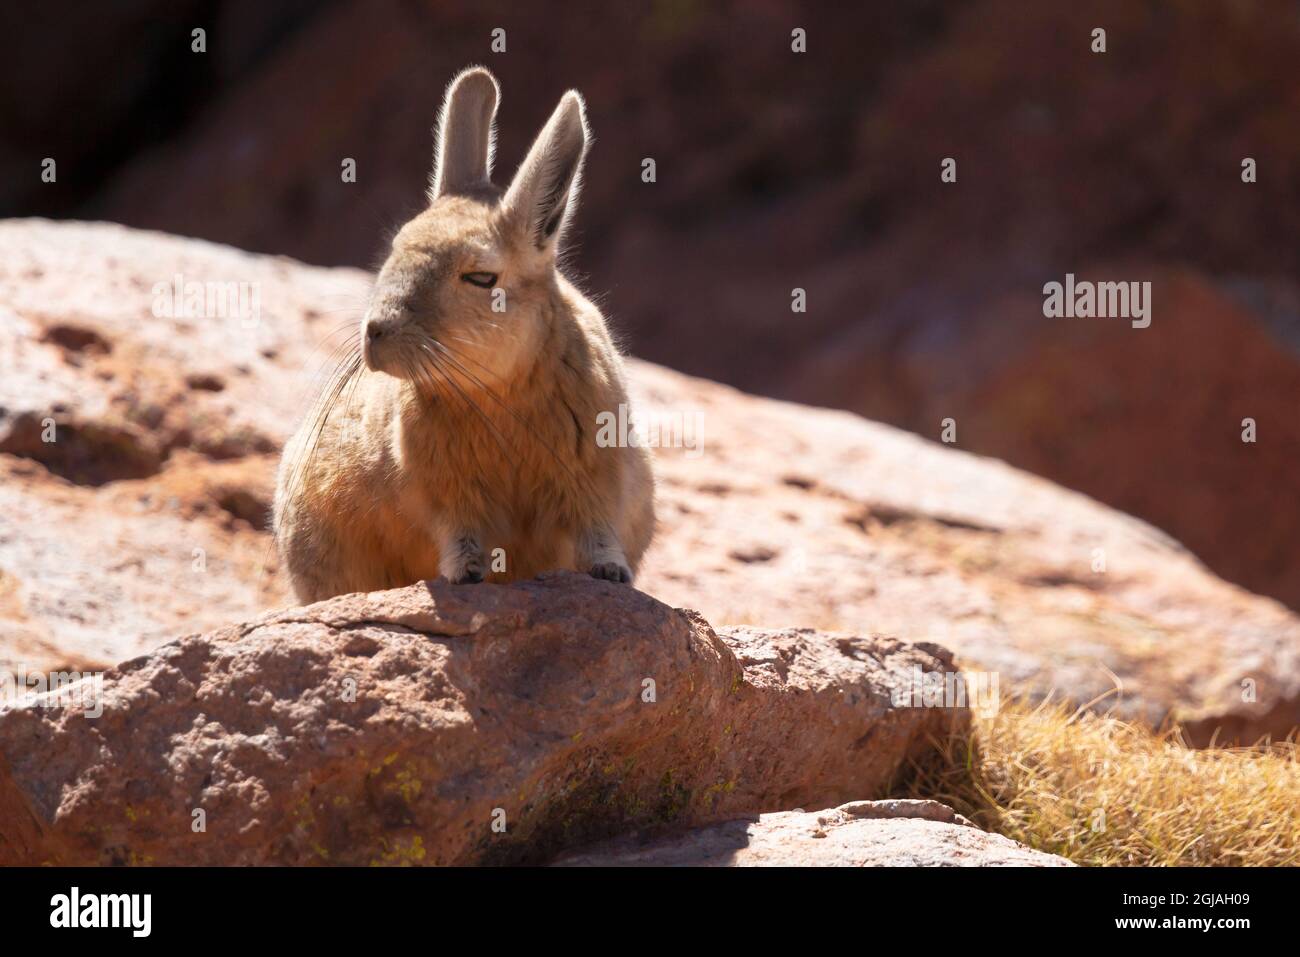 Bolivia, Atacama Desert, viscacha or vizcacha. This rodent is found in rocky areas in Bolivia. Stock Photo